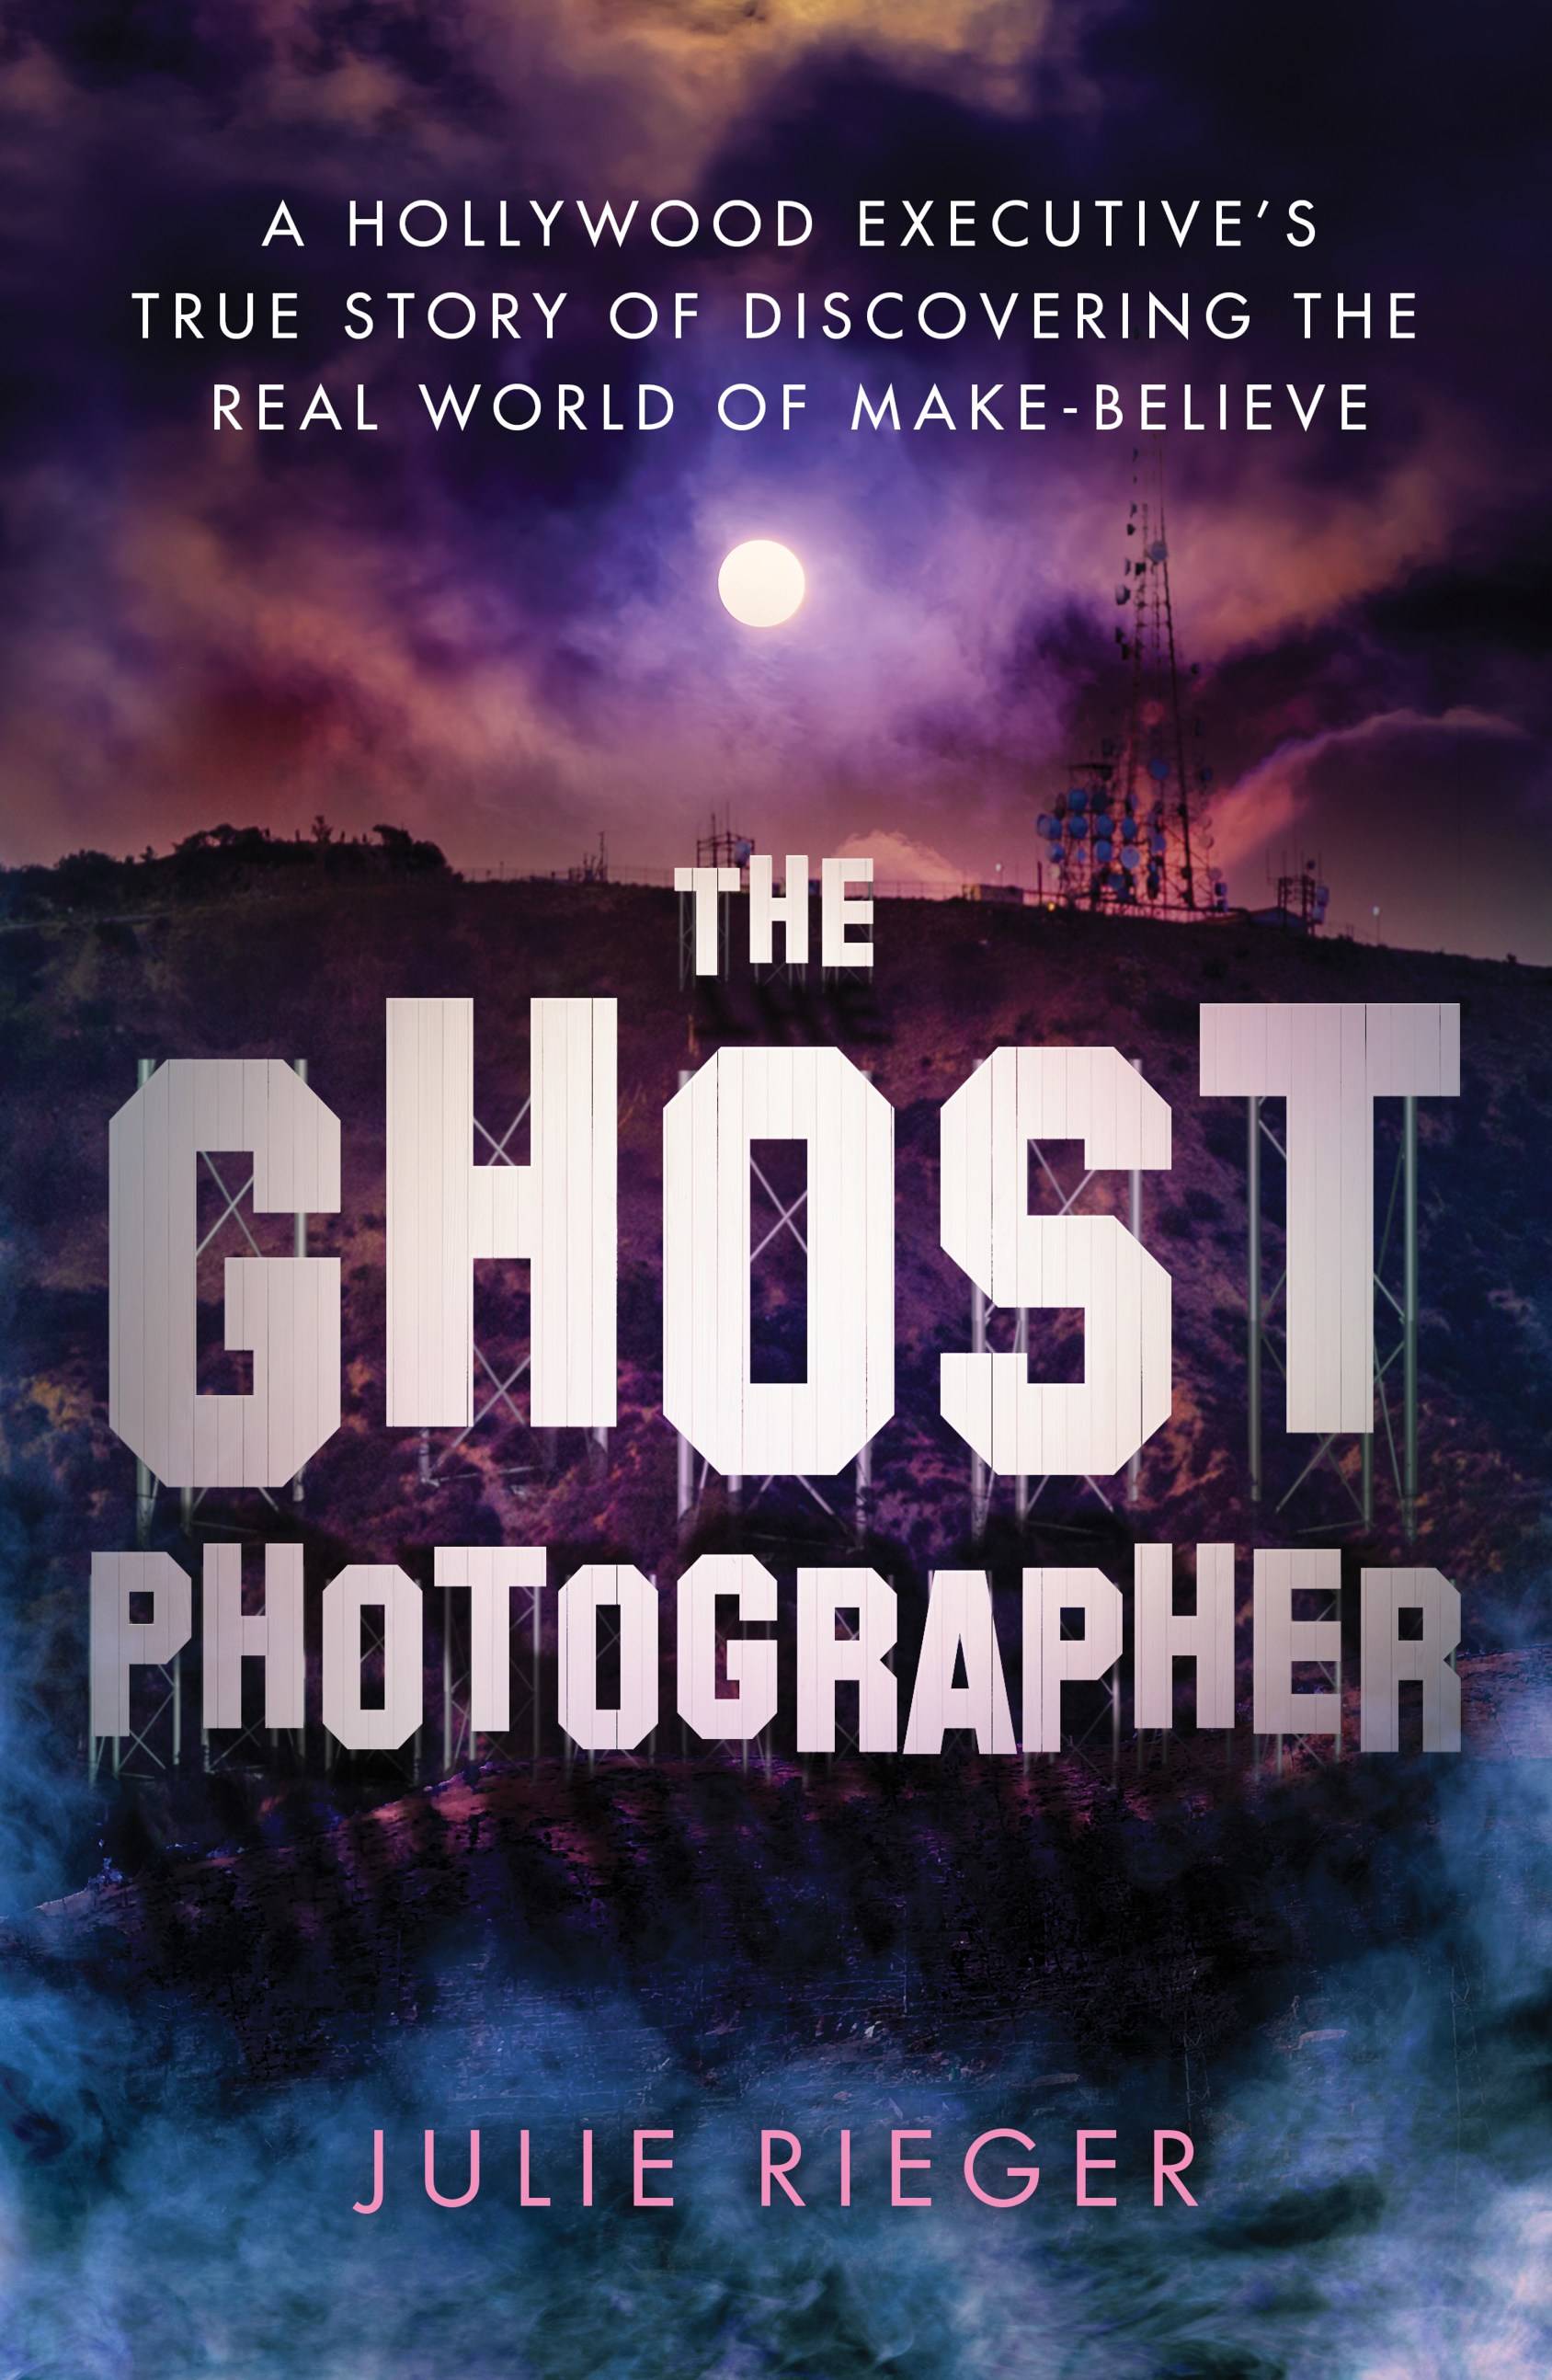 ‘The Ghost Photographer’ — Creepy, yet believable tales of Hollywood